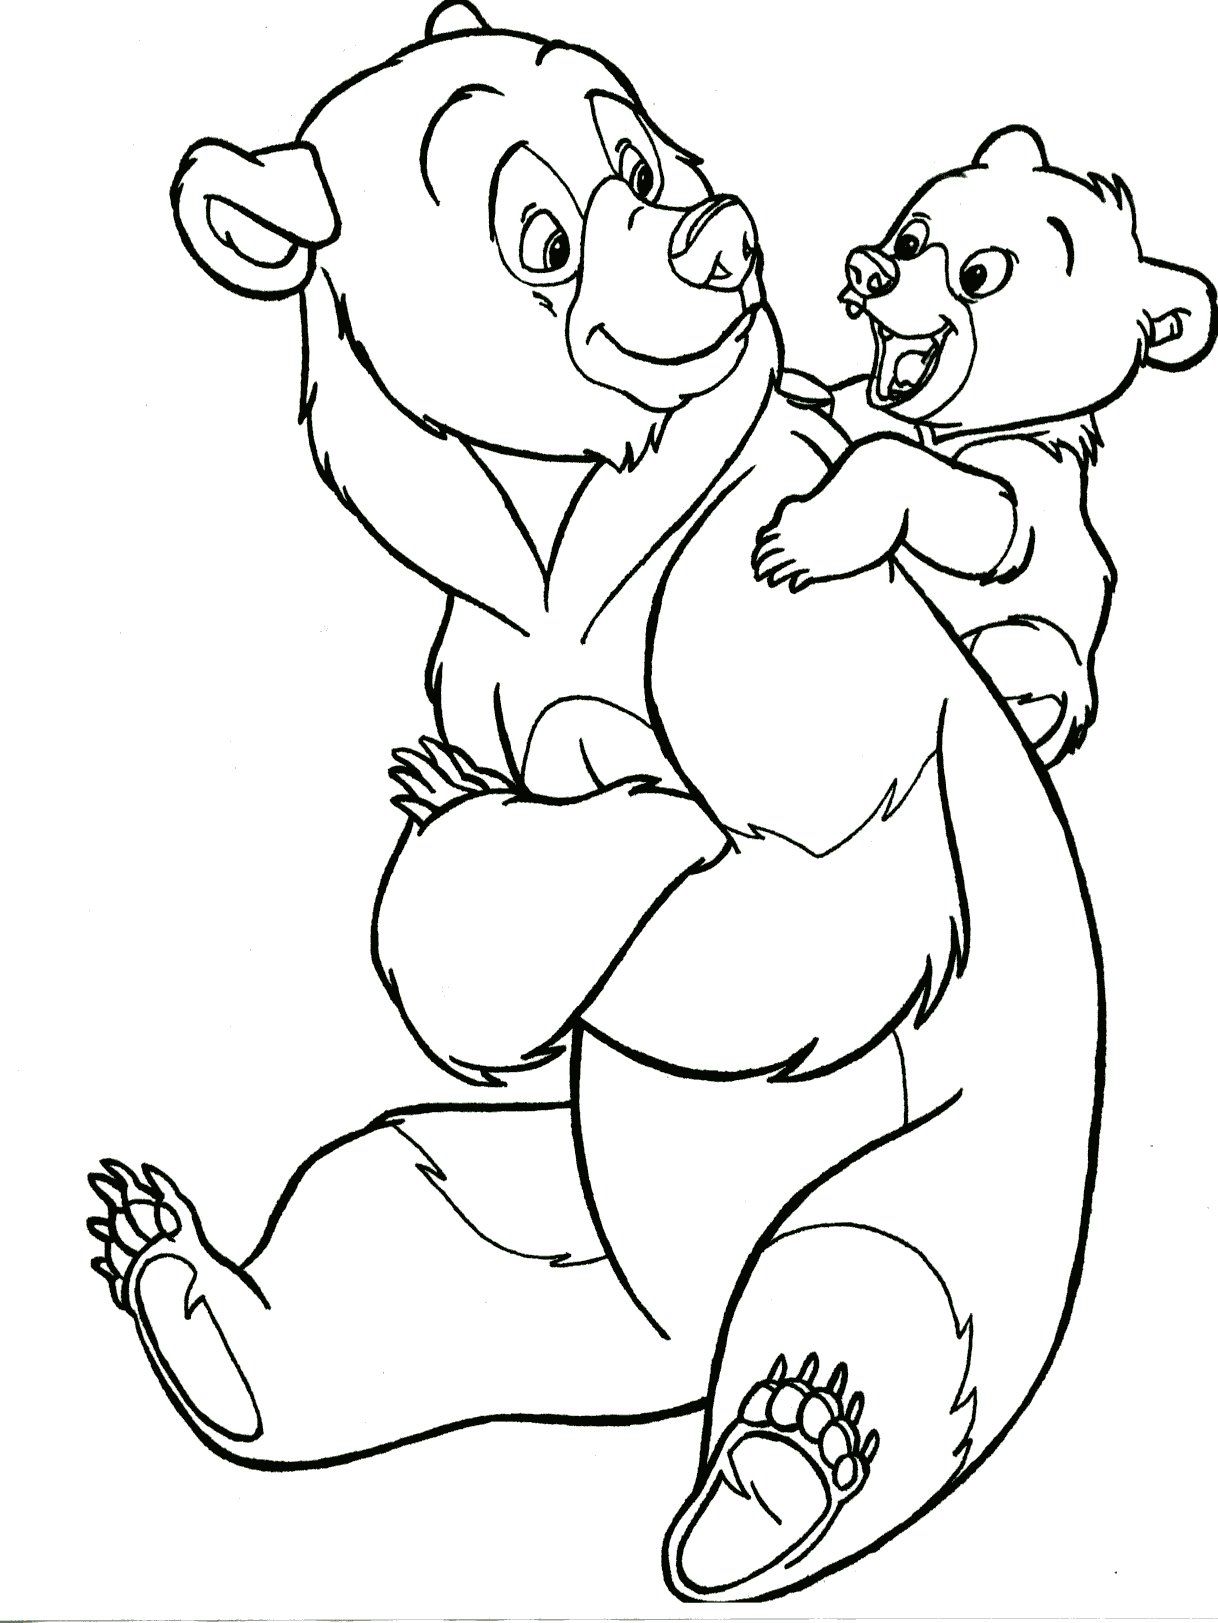 Brother bear coloring pages to download and print for free